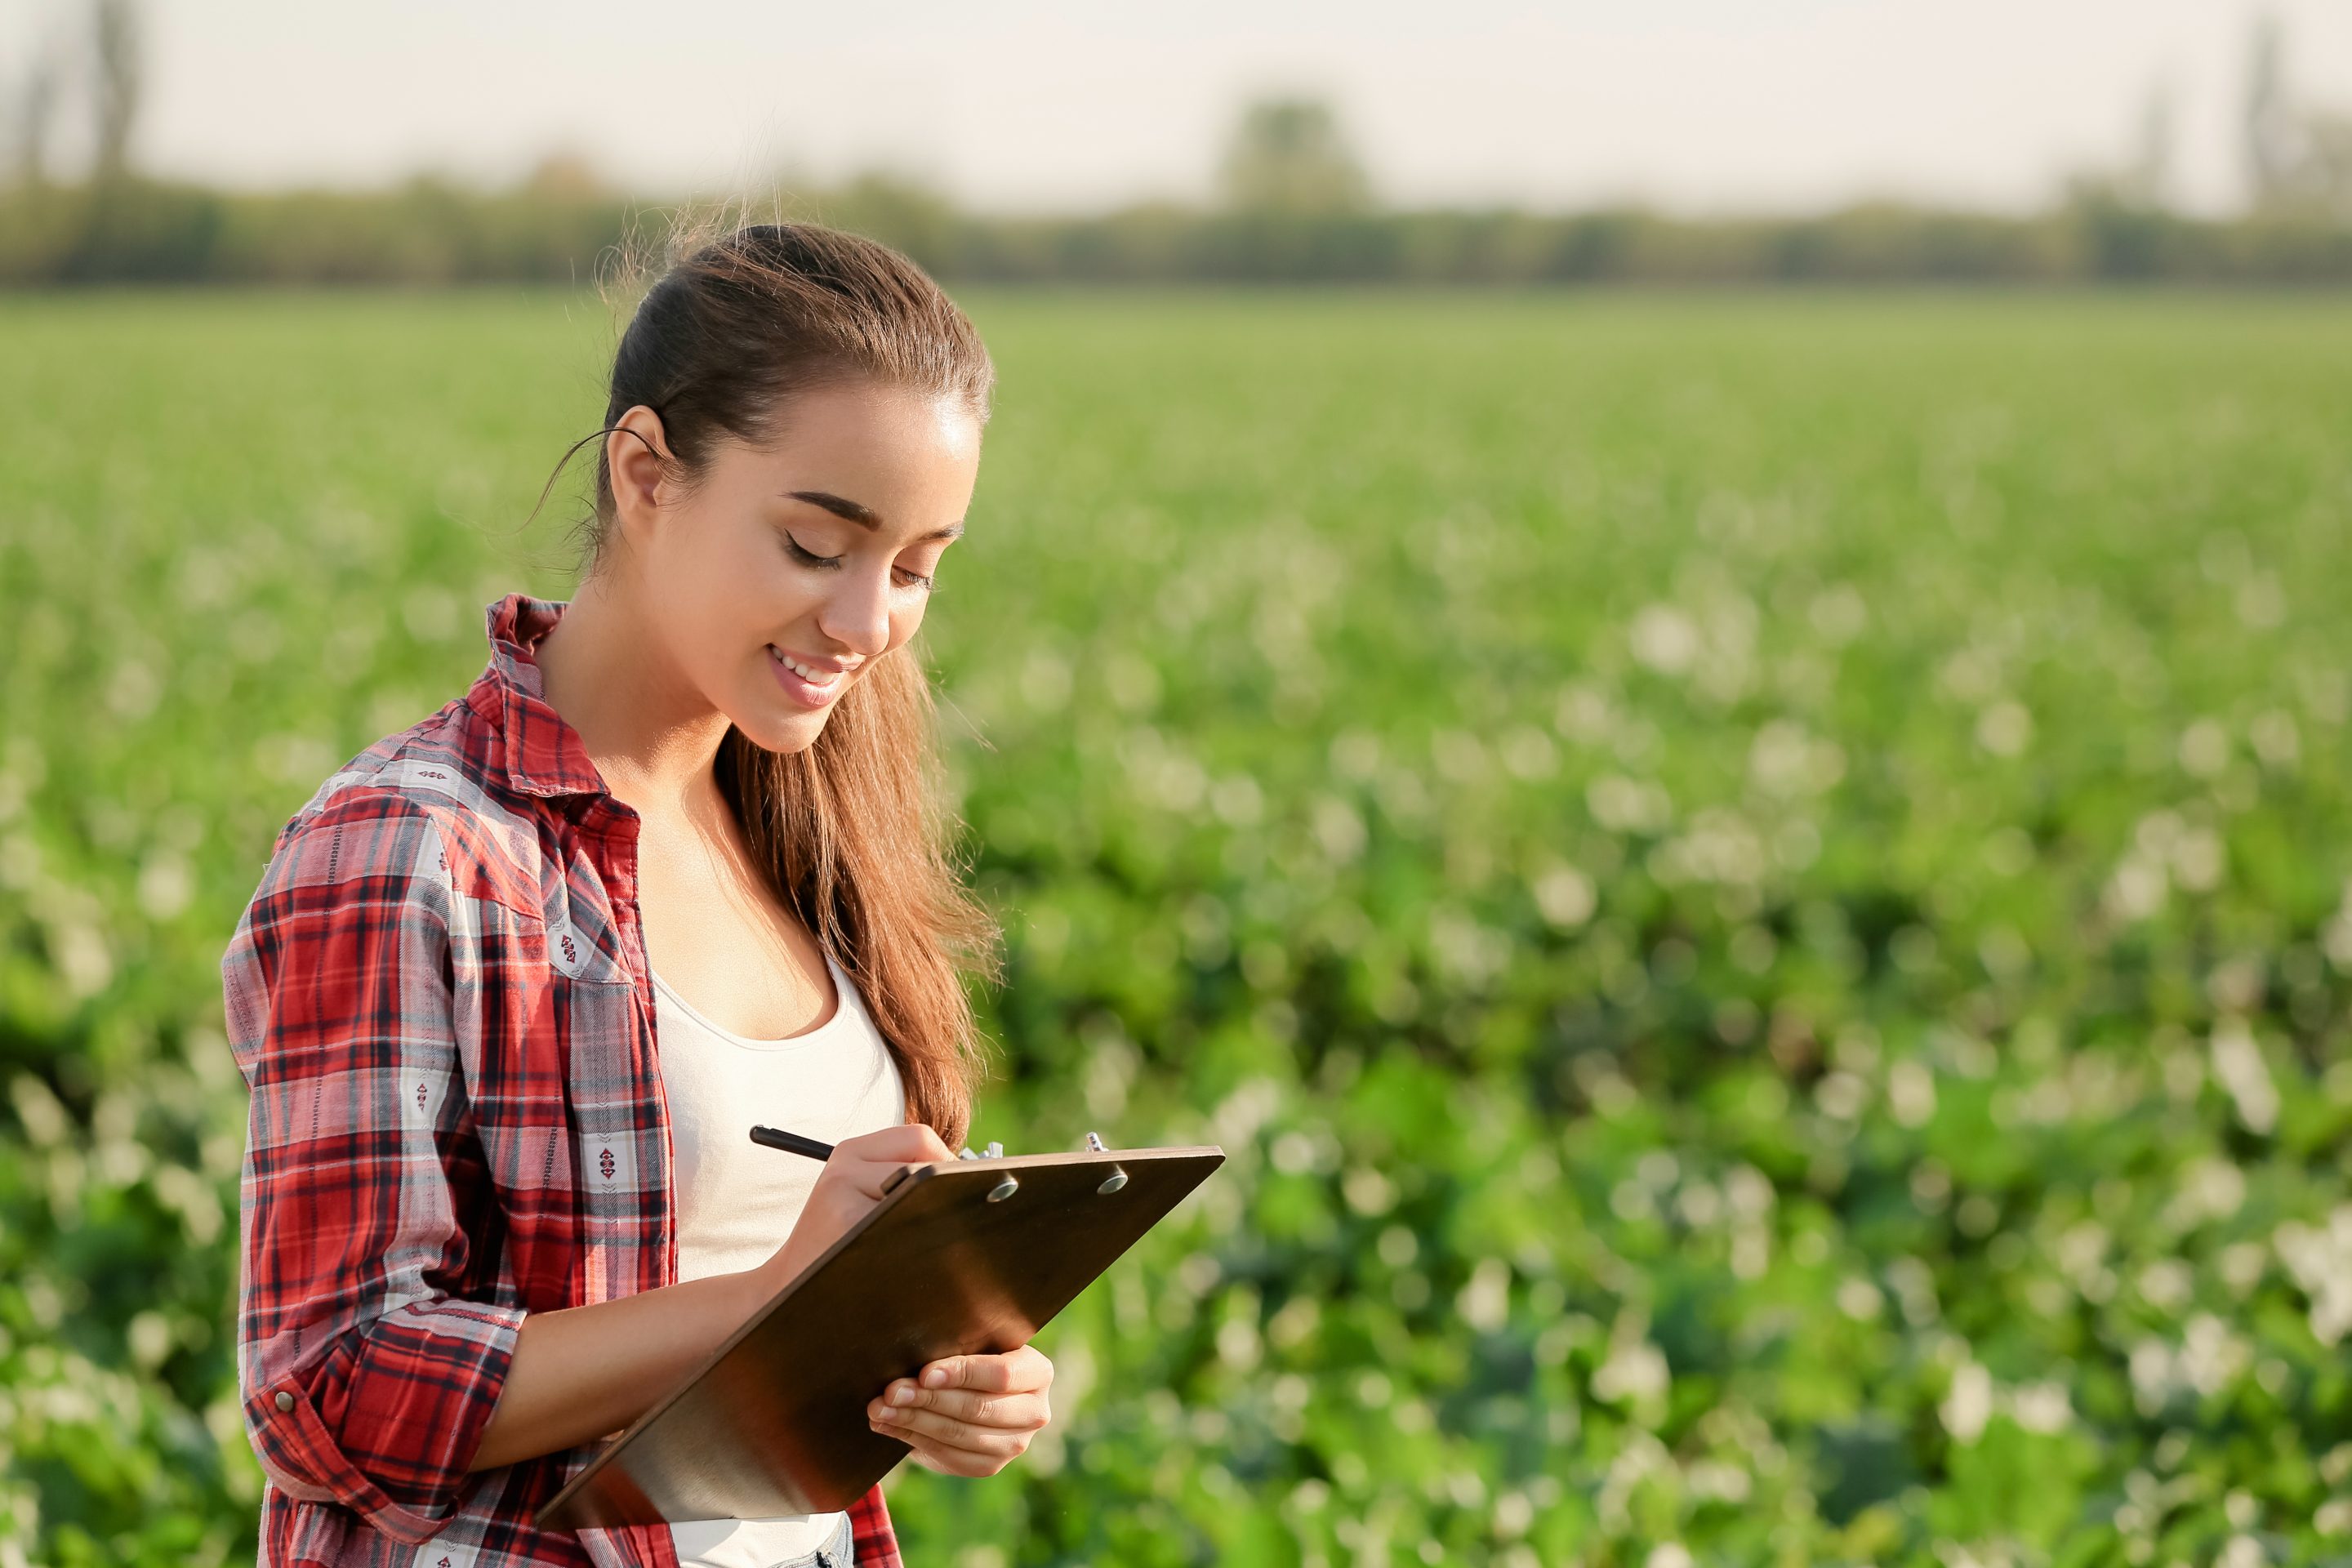 A woman writing down notes on a clipboard while standing in a field.